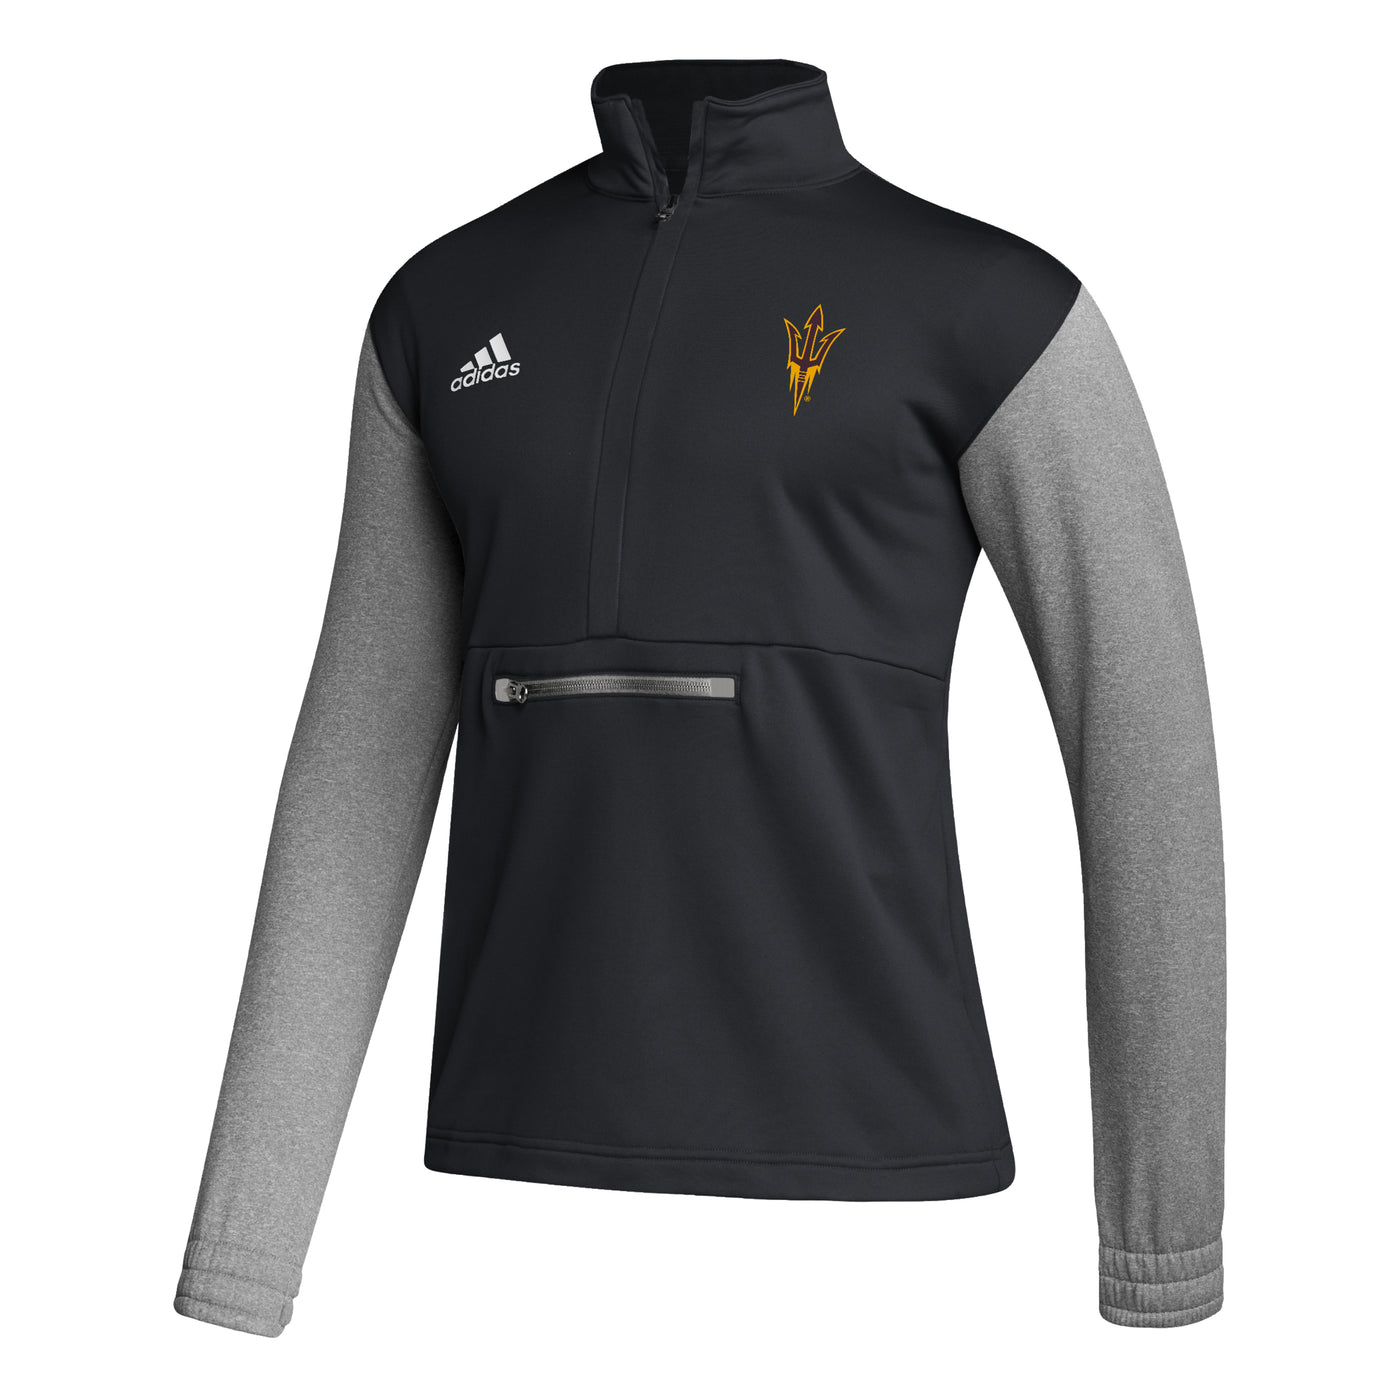 ASU black 1/4 zip jacket with grey sleeves. a small white adidas logo on one side of chest and a gold outline of a pitchfork on the otehr. A grey zipper on the front stomach for a pocket 